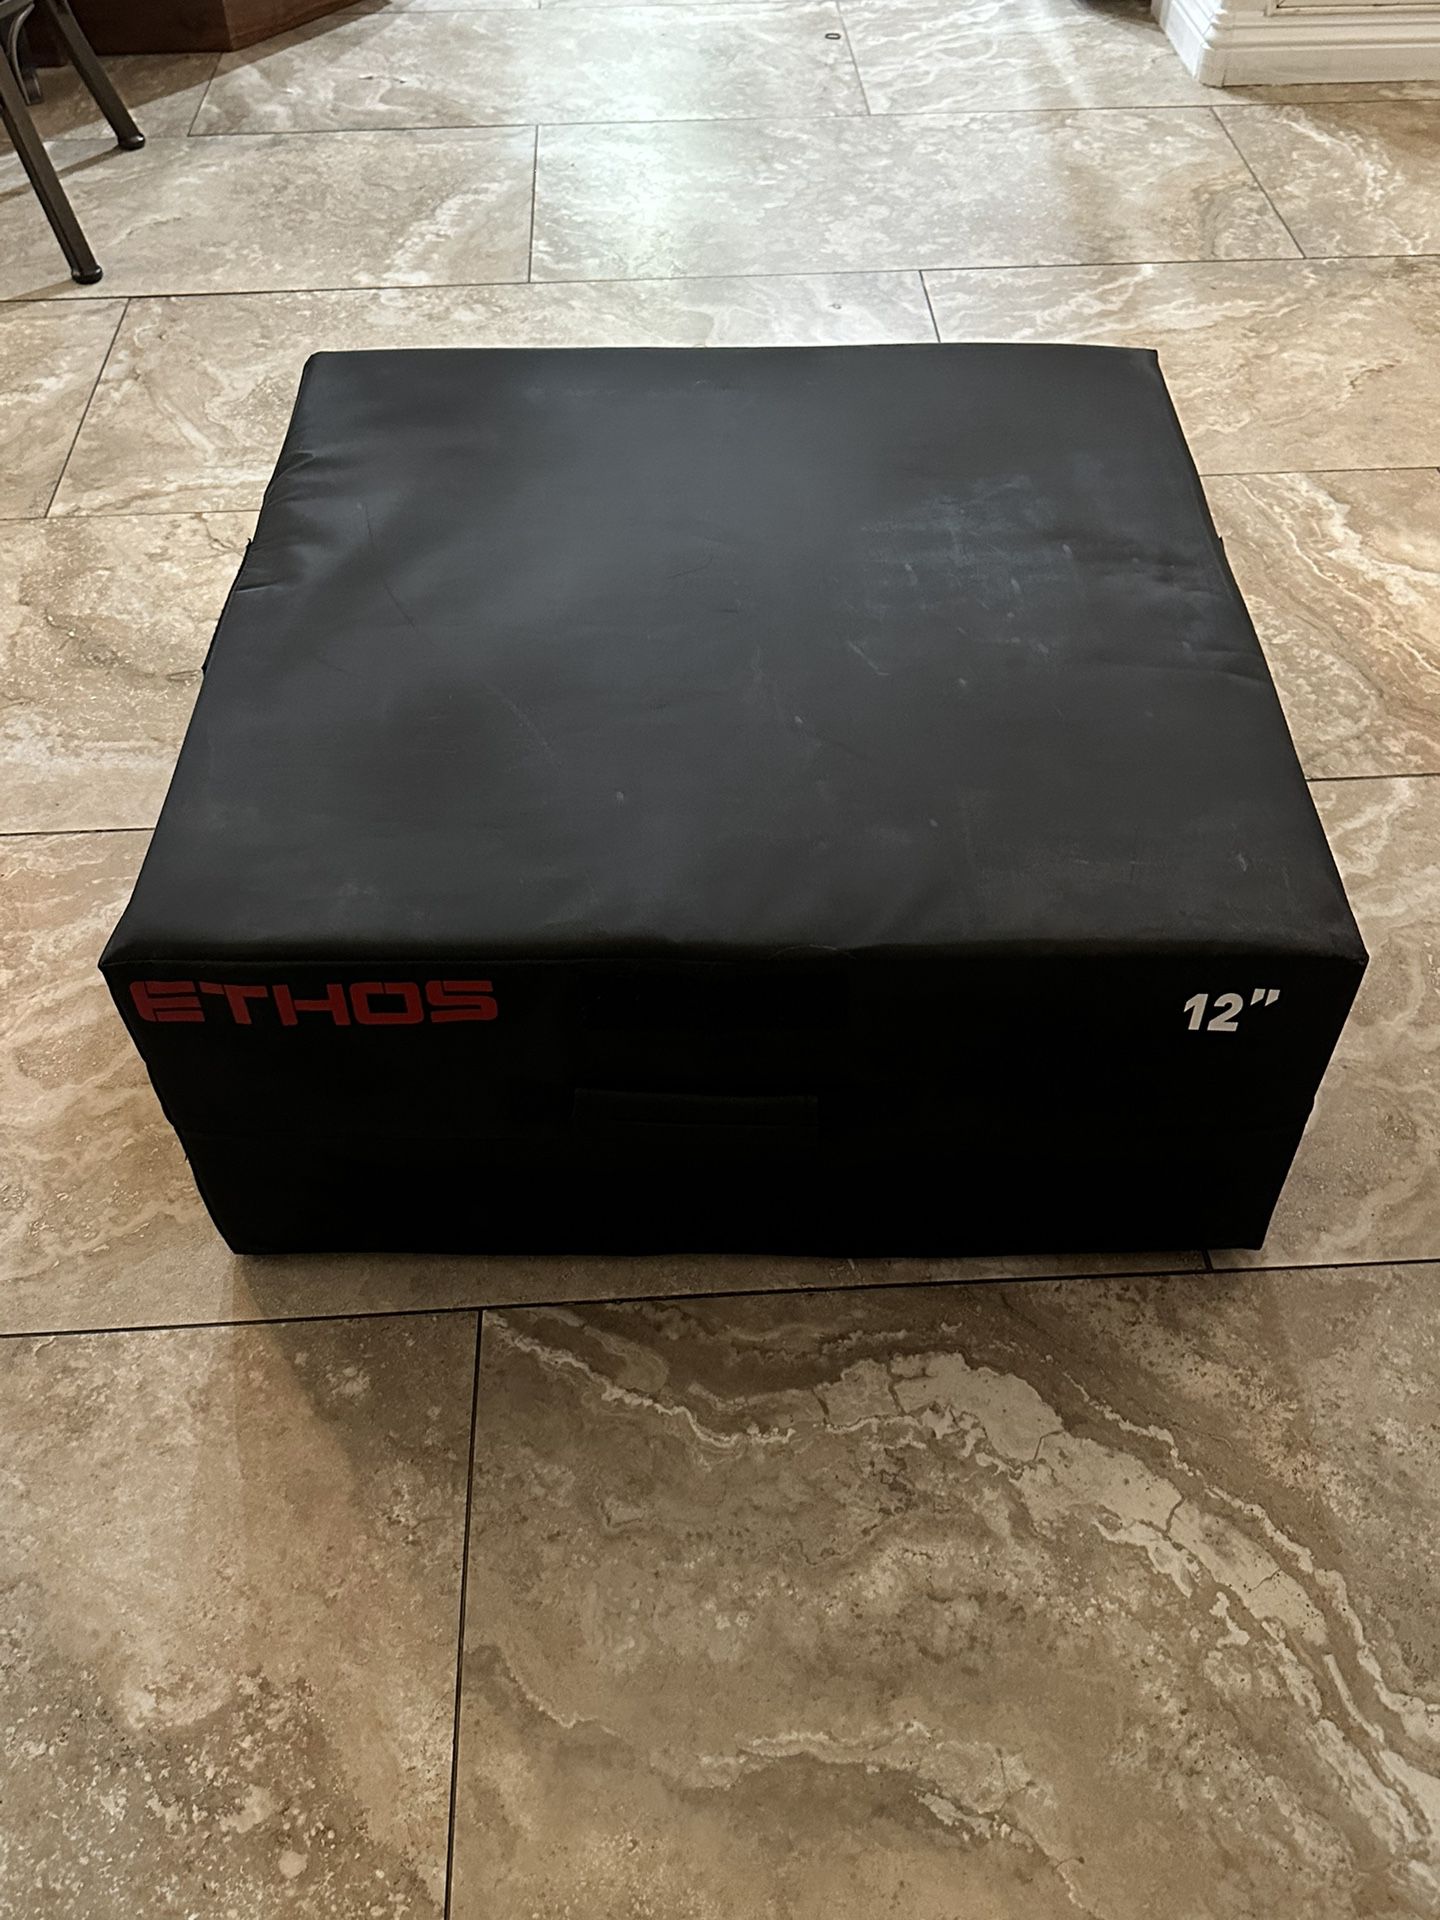 Ethos 12” Inch Jump Box For CrossFit 